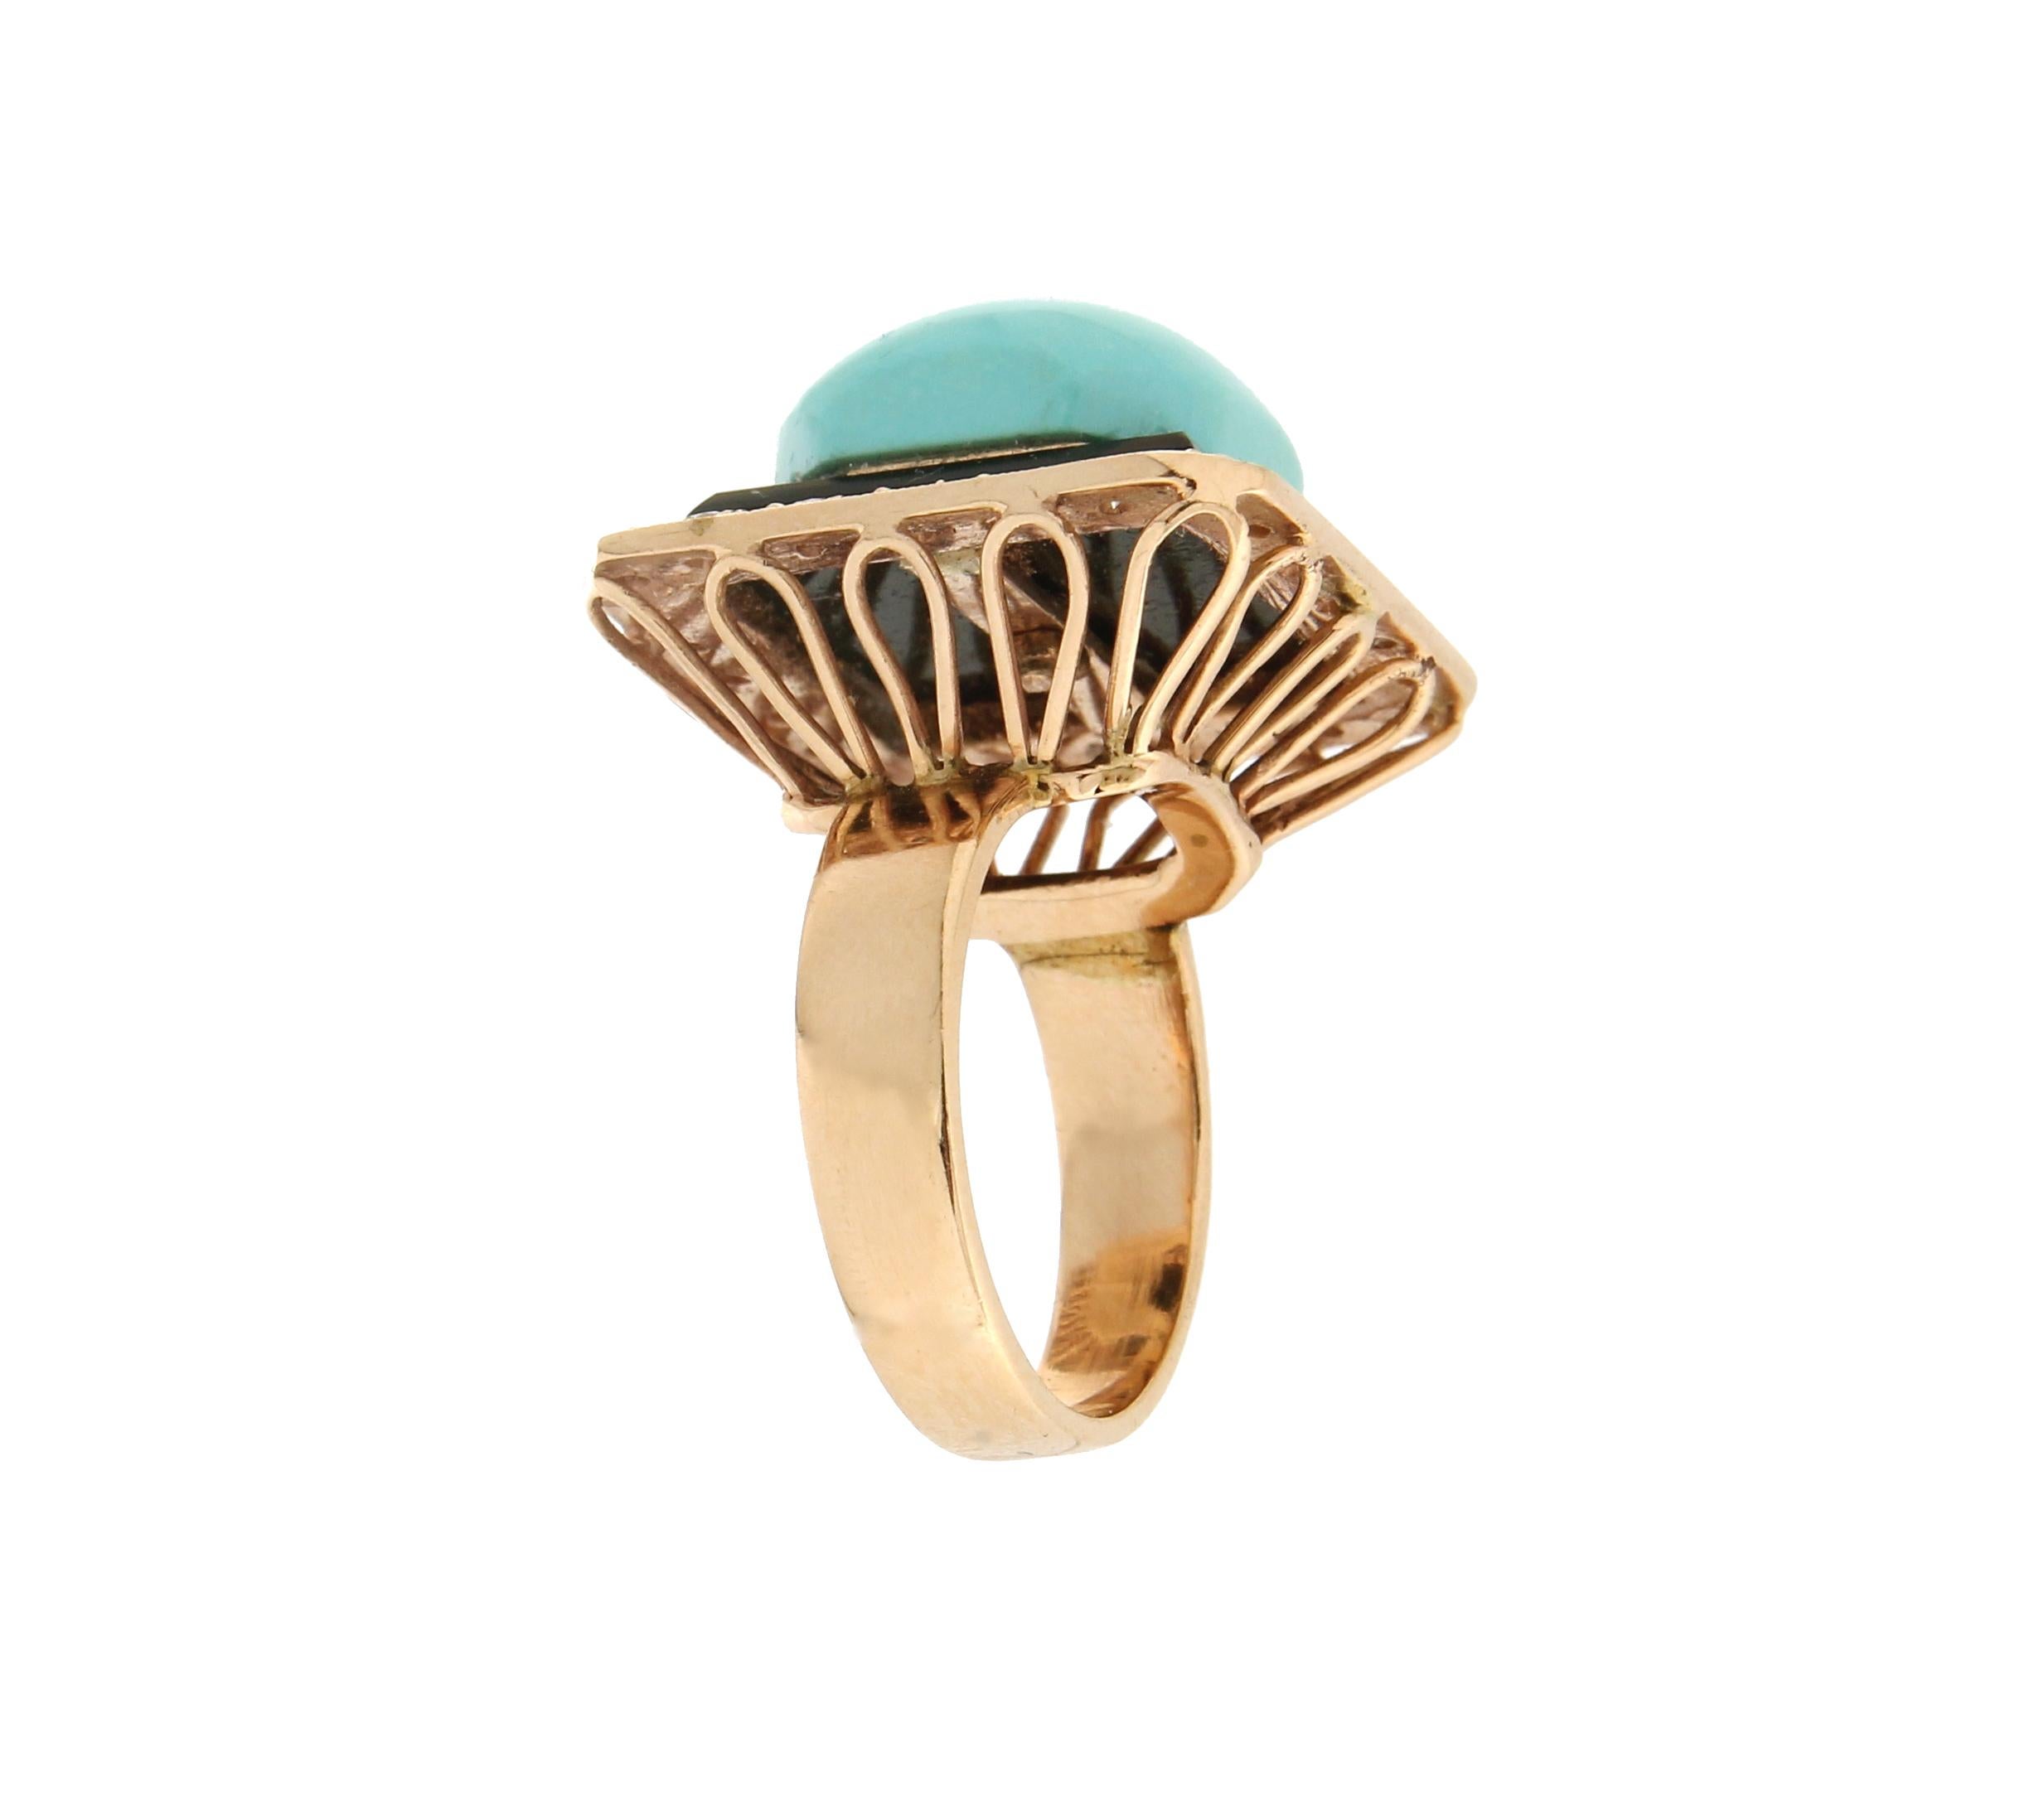 Handcraft Turquoise 14 Karat Yellow Gold Diamonds Onyx Cocktail Ring For Sale 1